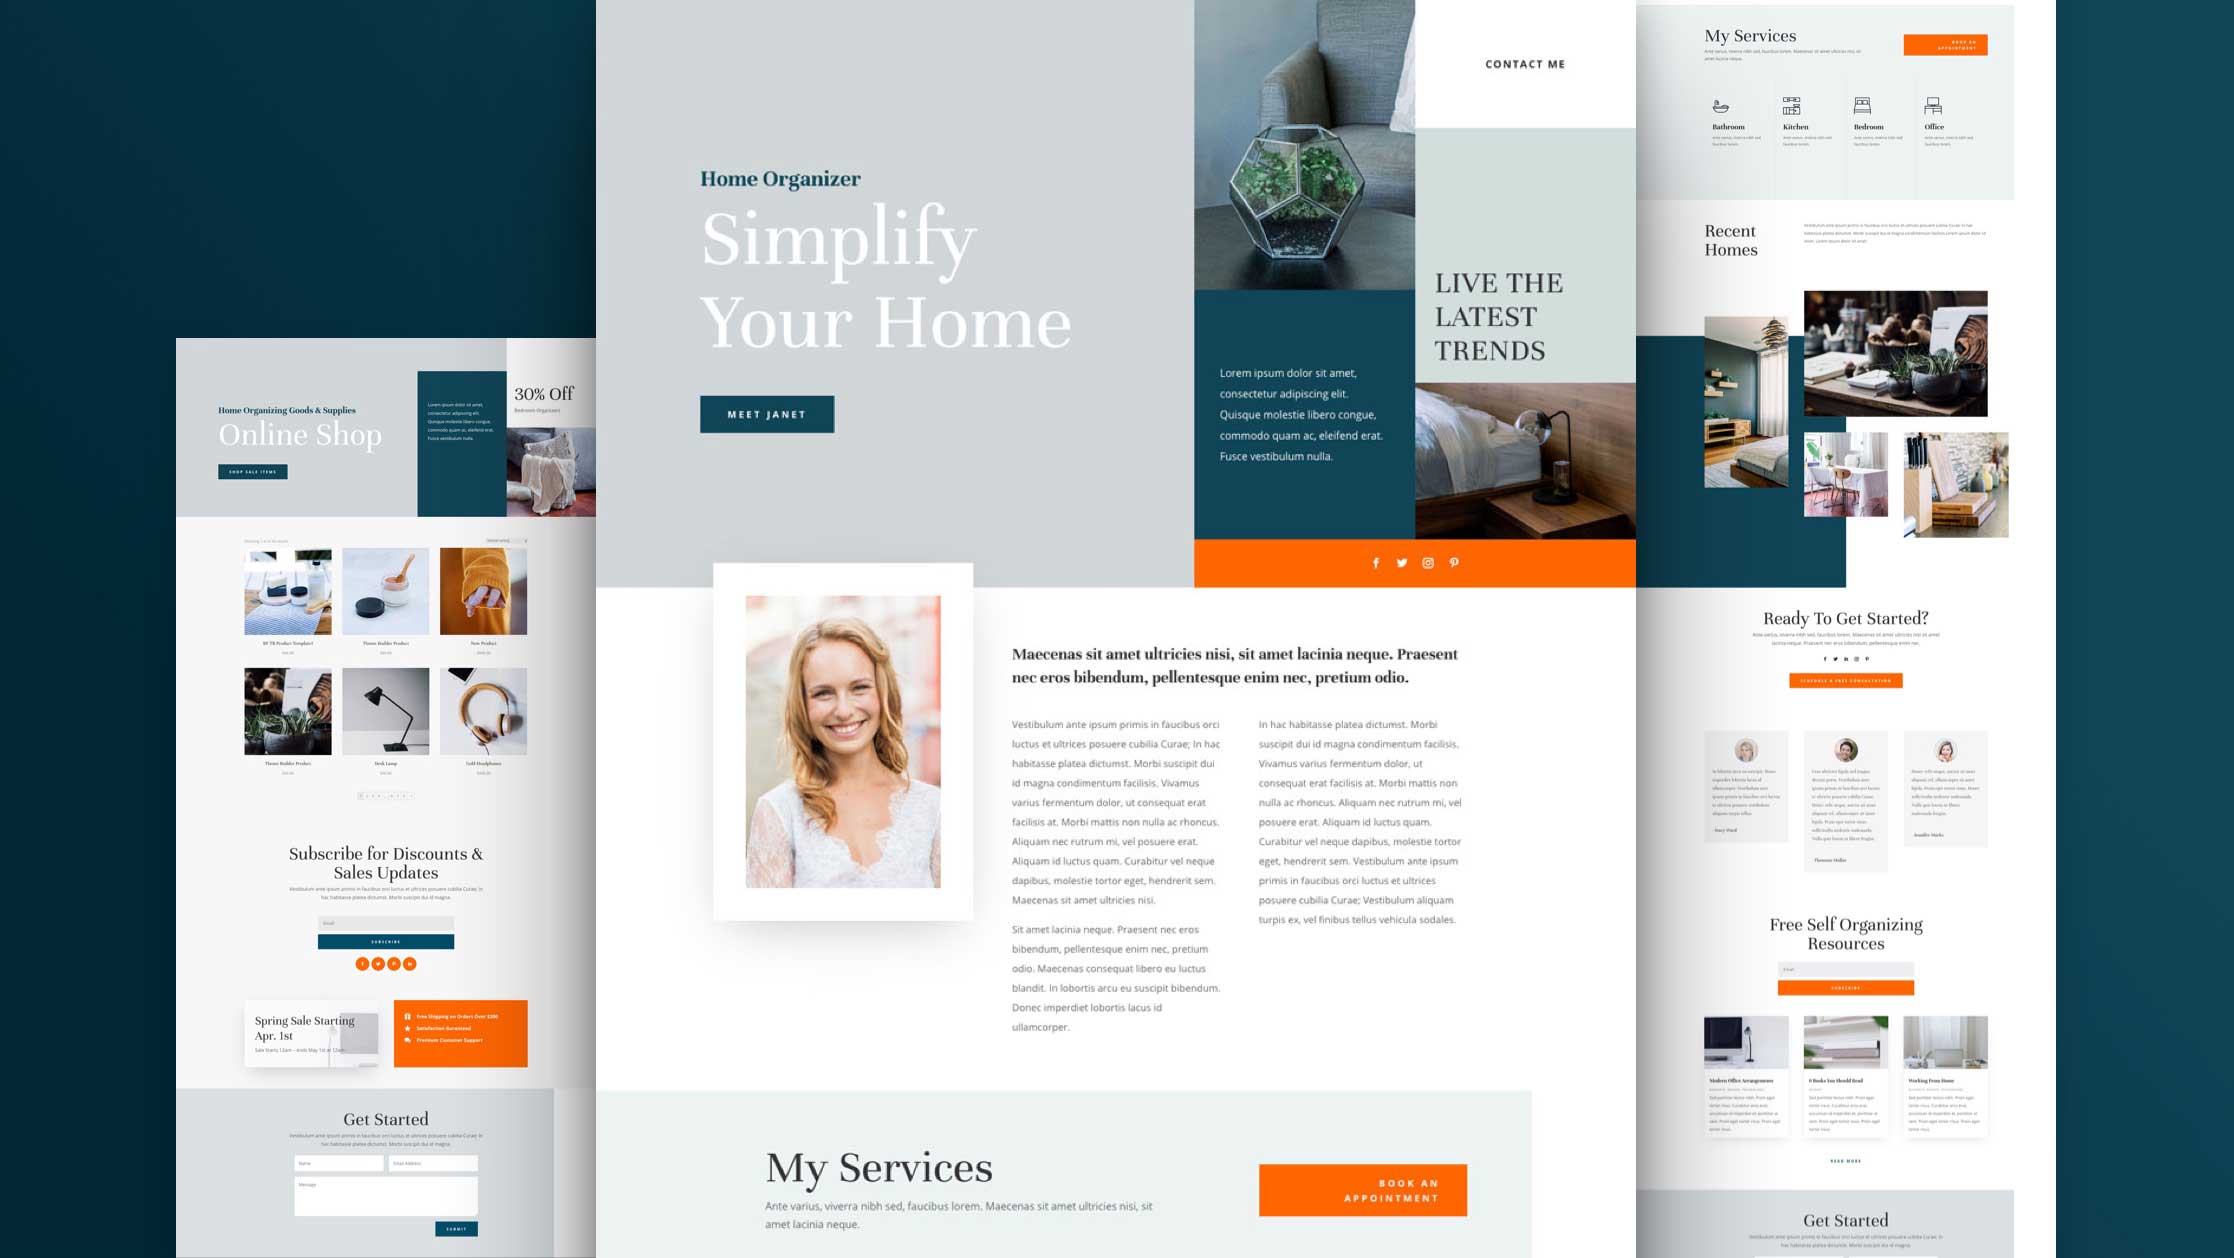 Get a FREE Home Organizer Layout Pack for Divi